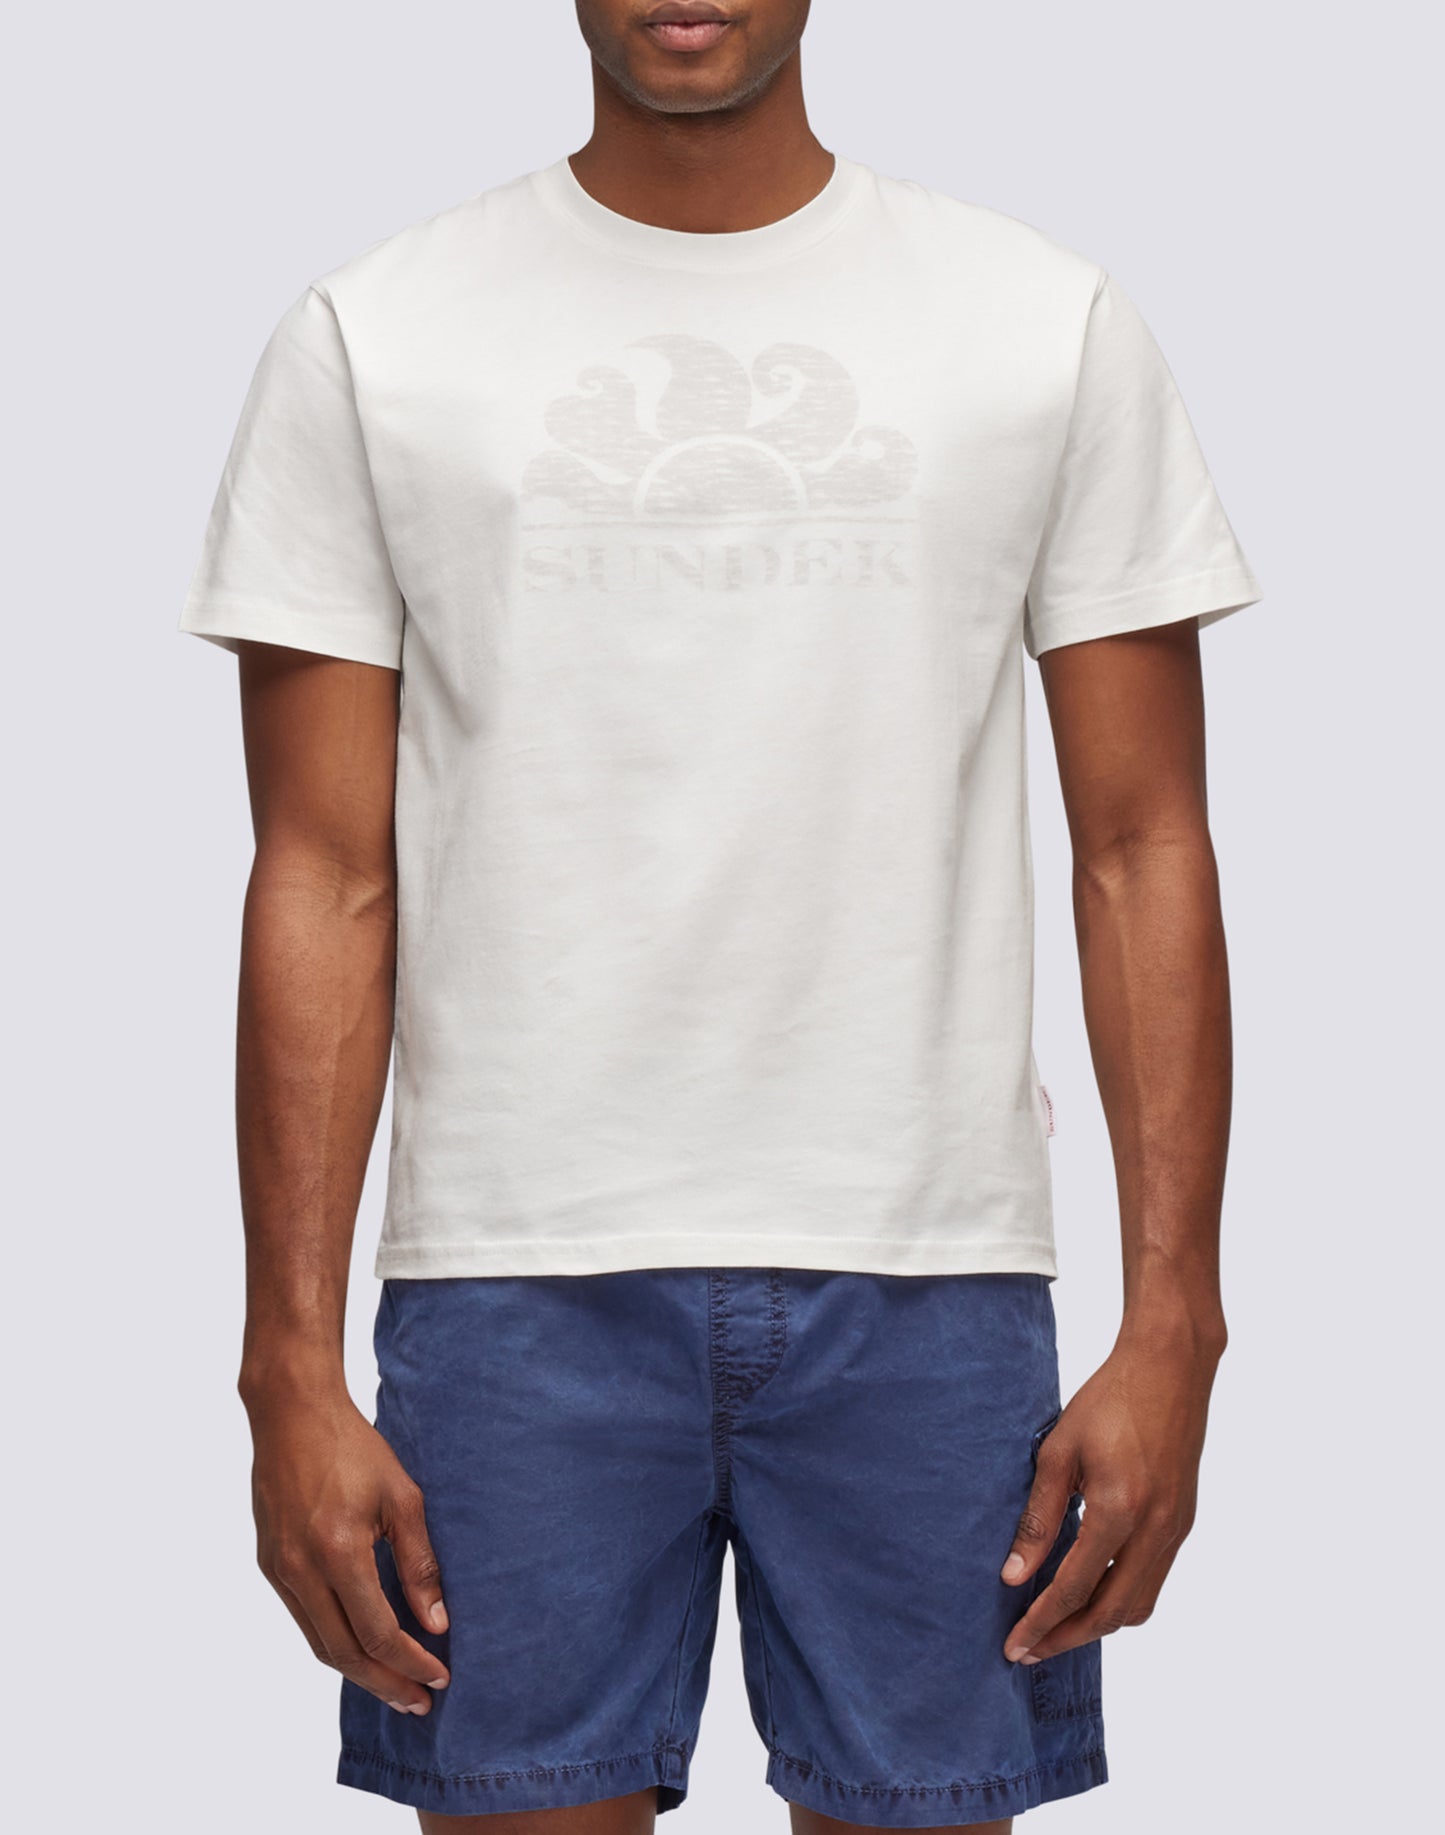 SHORT-SLEEVED T-SHIRT WITH LOGO